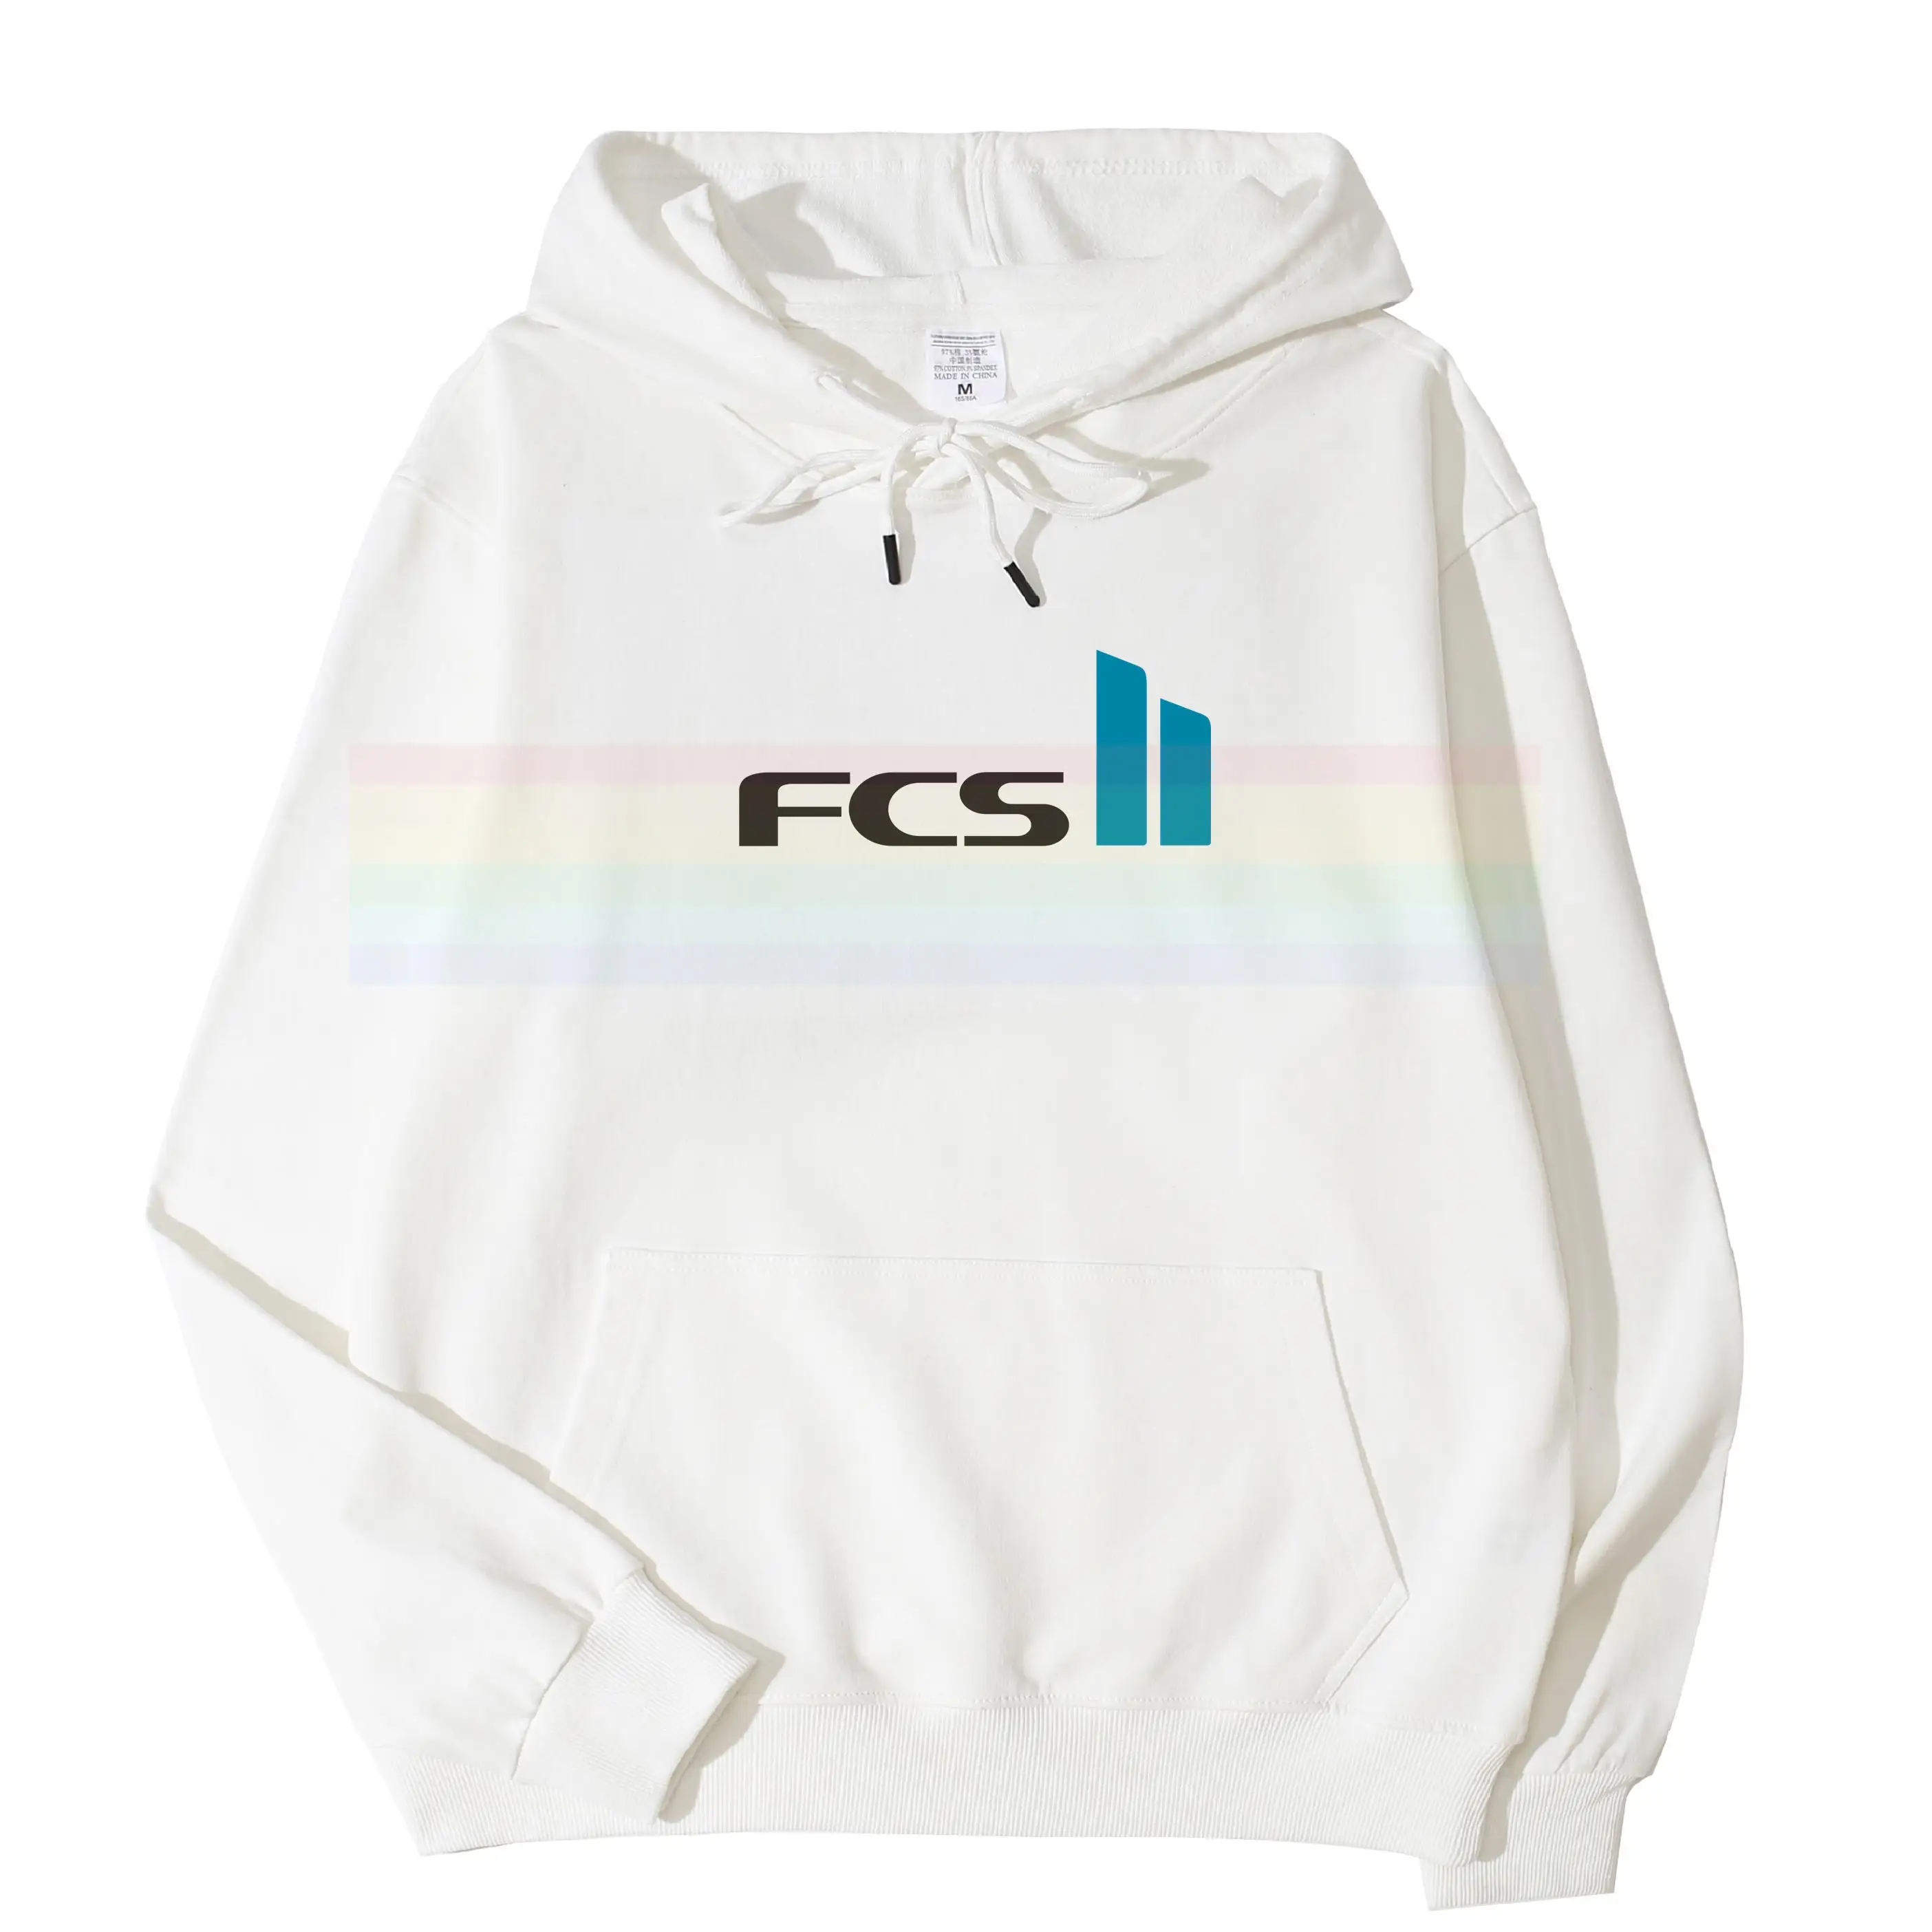 

Fin Control System FCS Men's Hoodies women Spring Autumn Paired Couples Casual Hoodies Sweatshirts surfing brand Hoodies TopsN04